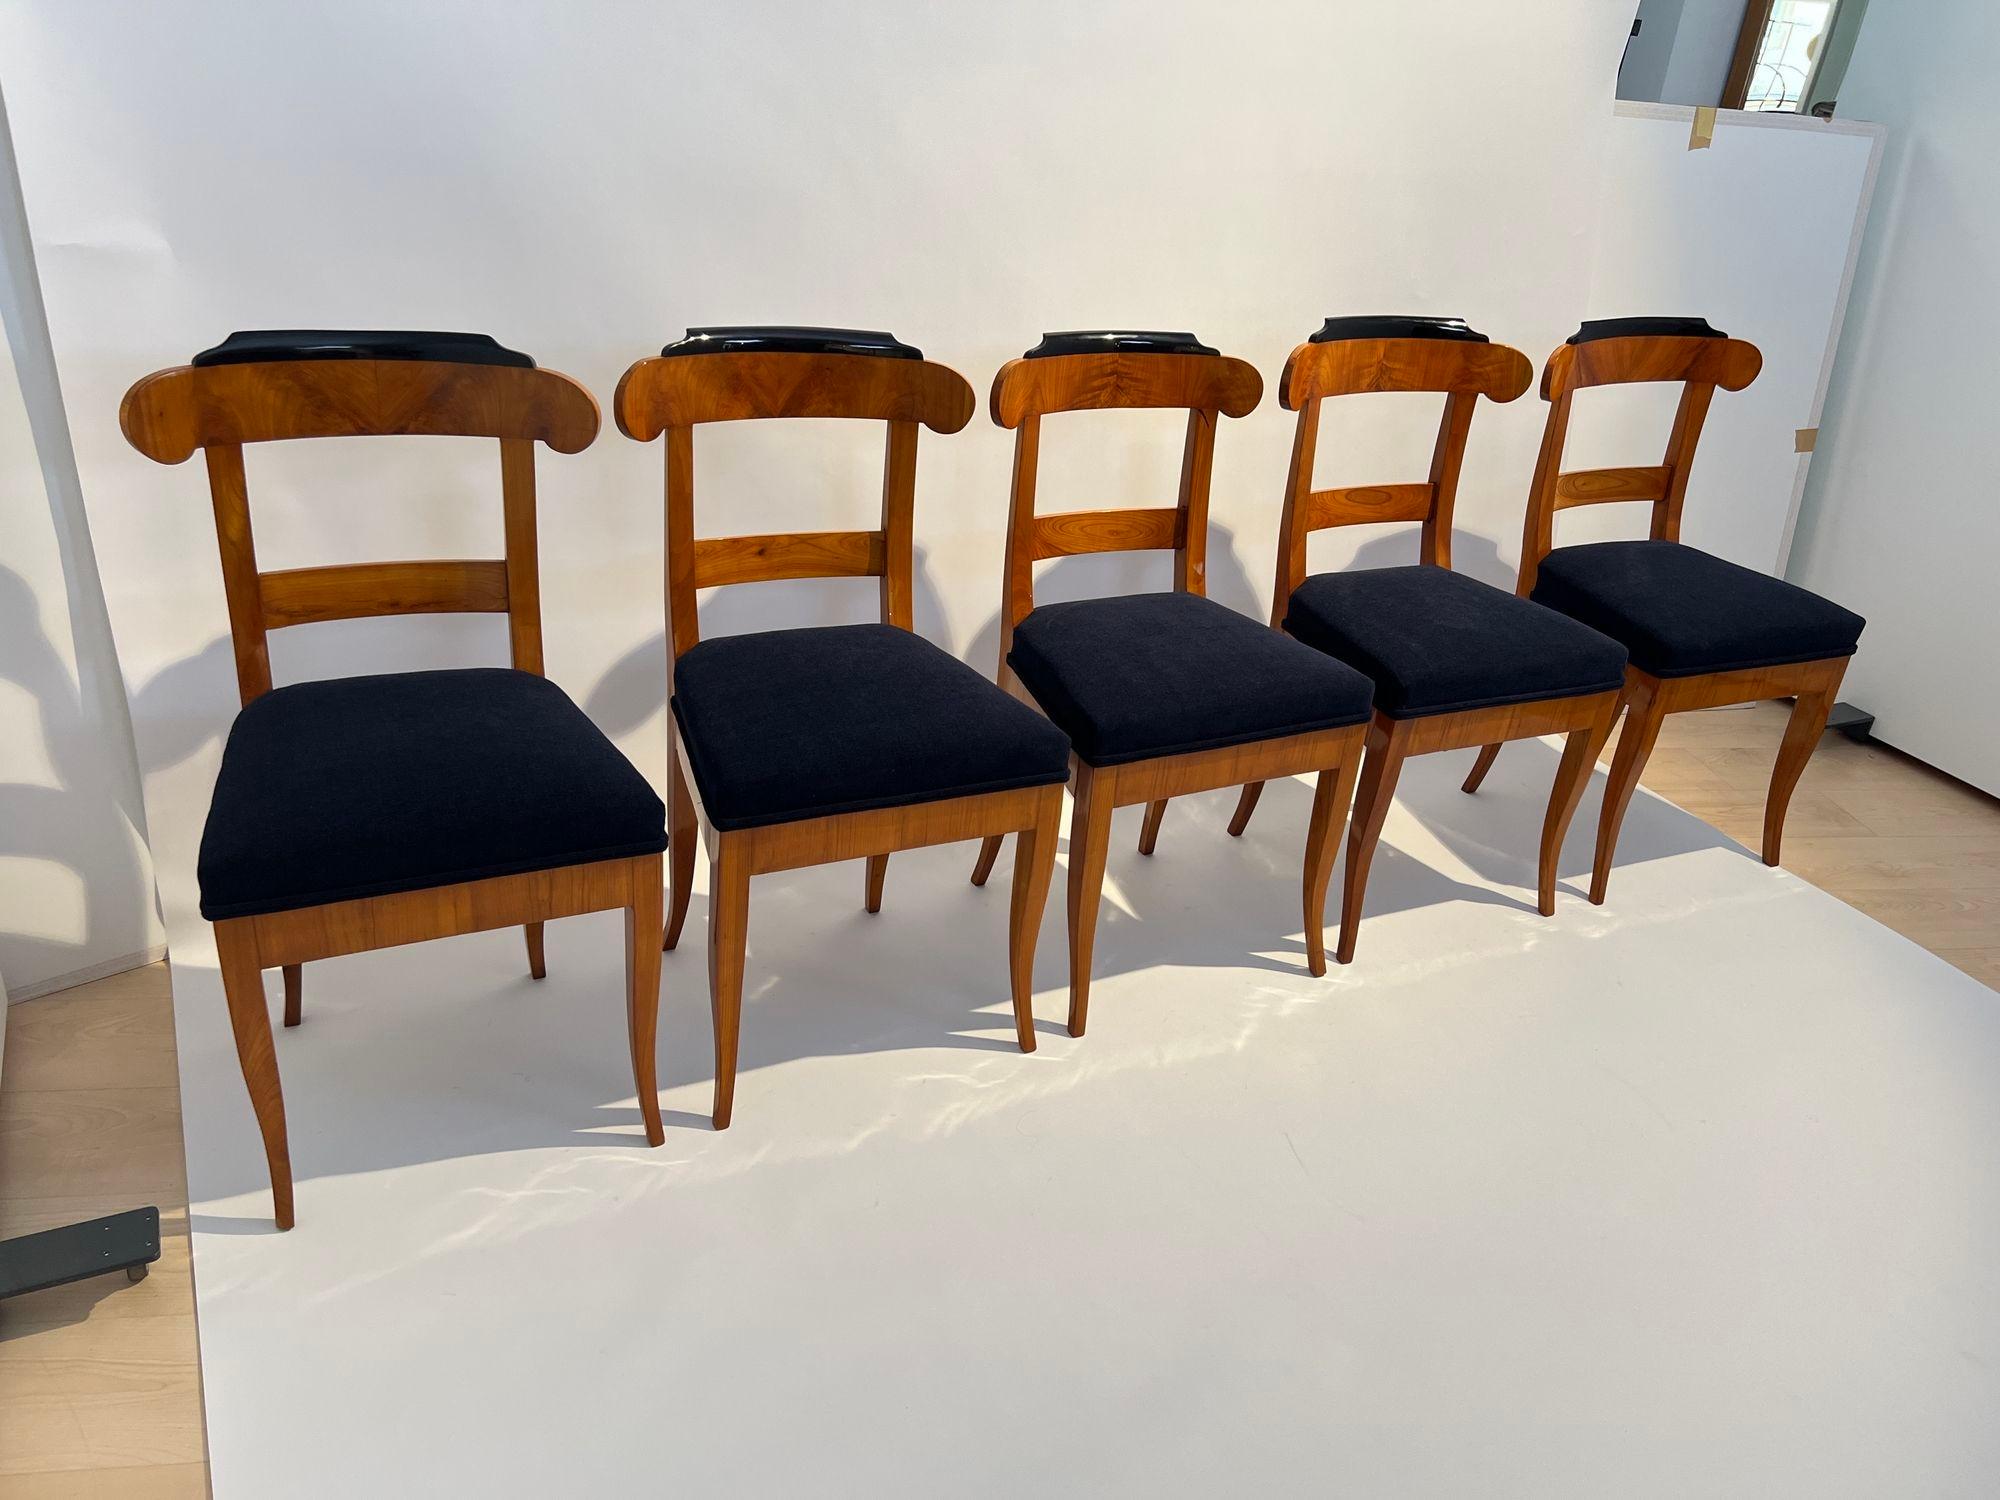 Set of five original Biedermeier shovel chairs from Thuringia, Germany around 1830.

Cherry wood book-matched veneered on the shovel and apron. Cherry solid wood frame and legs.
Top with ebonized attachment.
Newly upholstered and covered in black